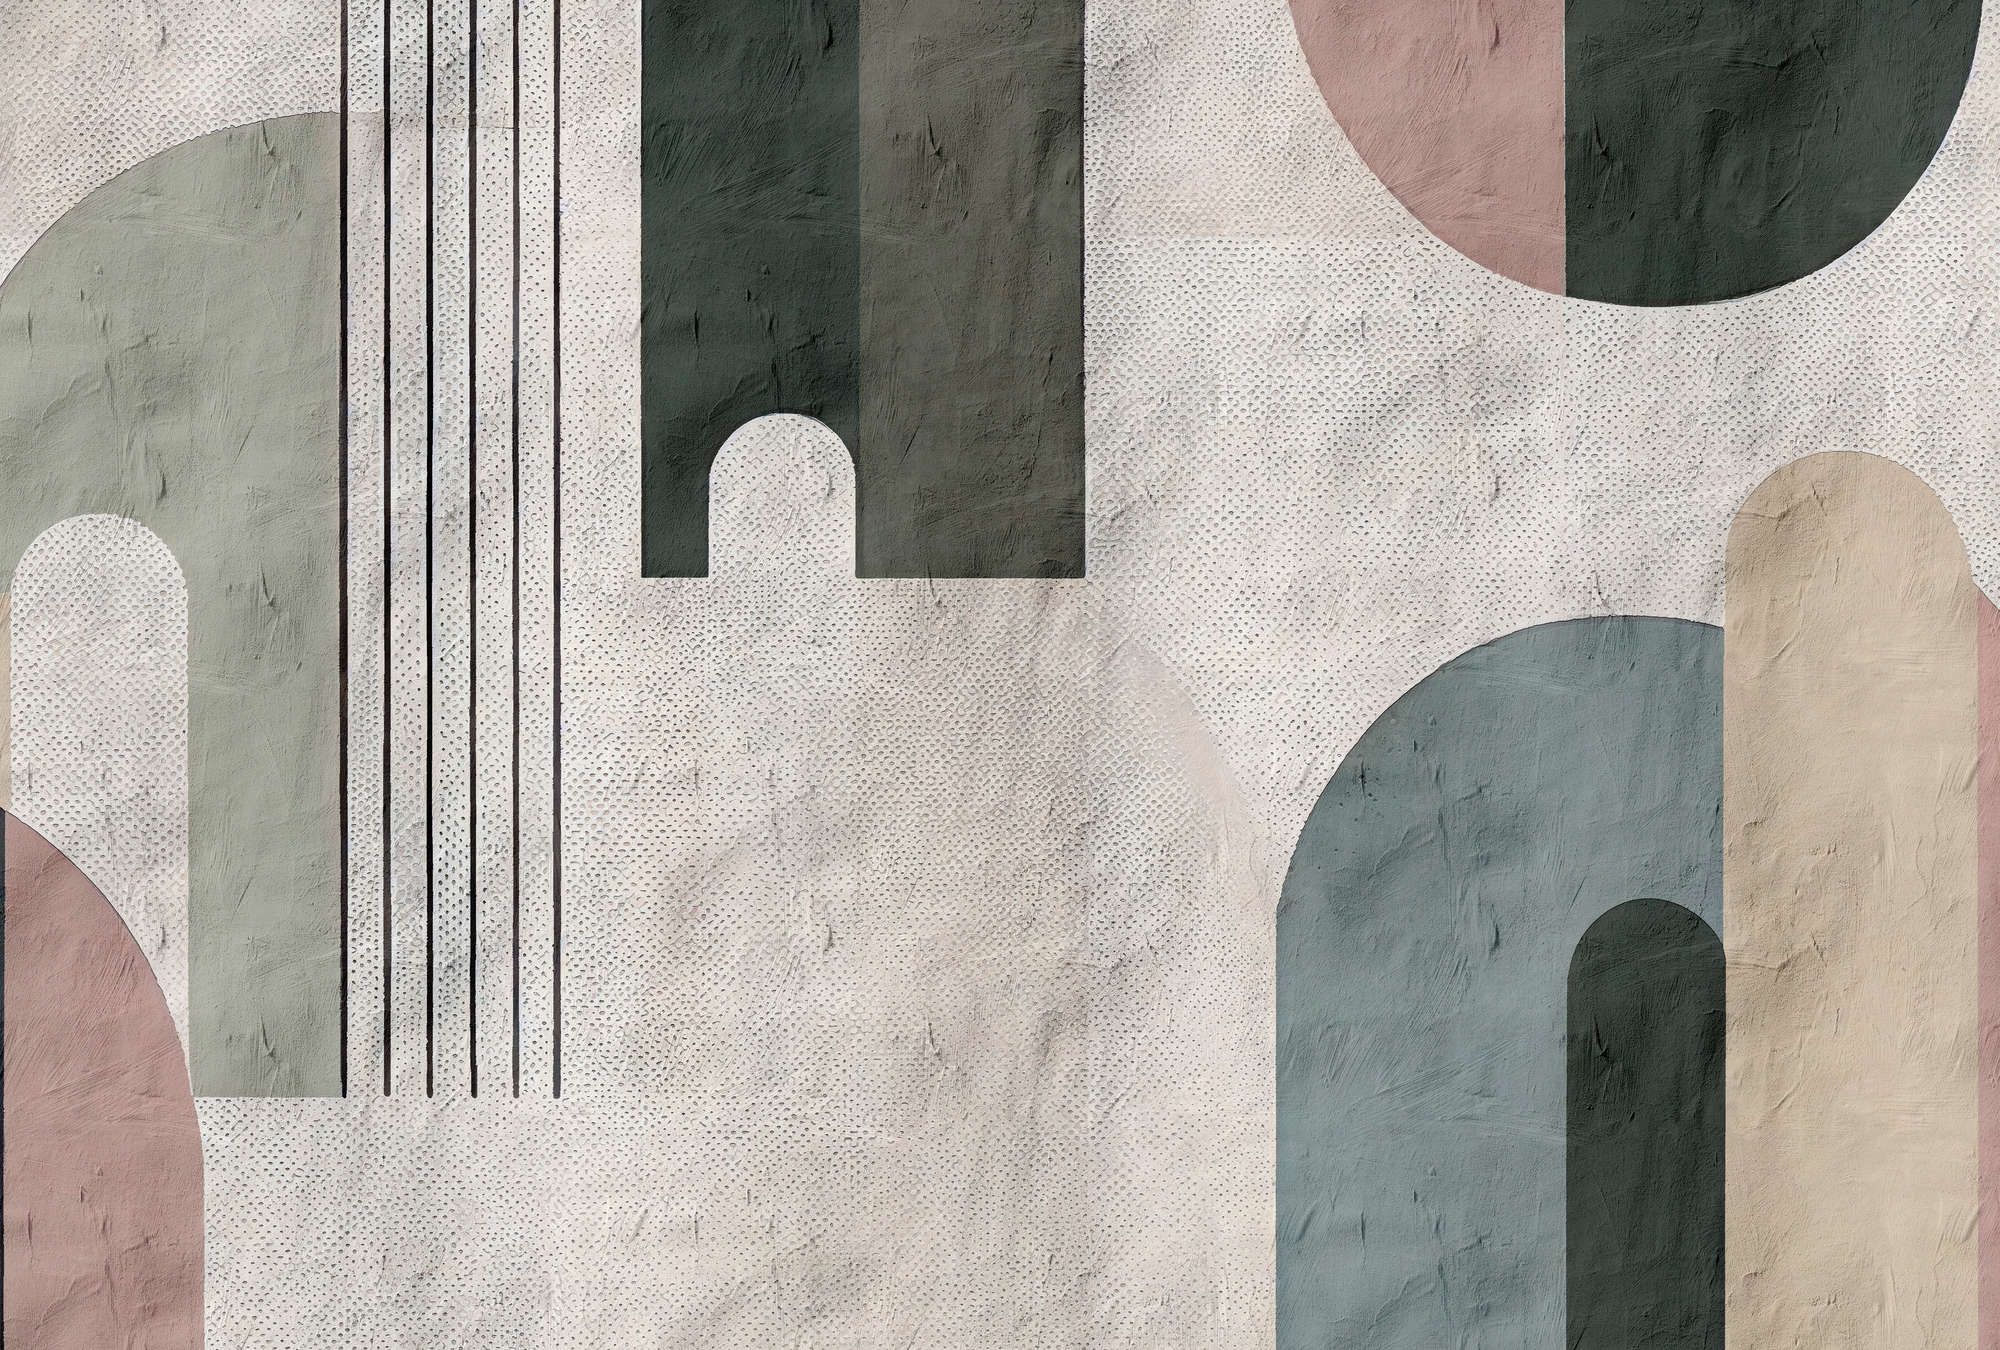             Photo wallpaper »torenta« - Graphic pattern with round arch, clay plaster texture - Lightly textured non-woven fabric
        